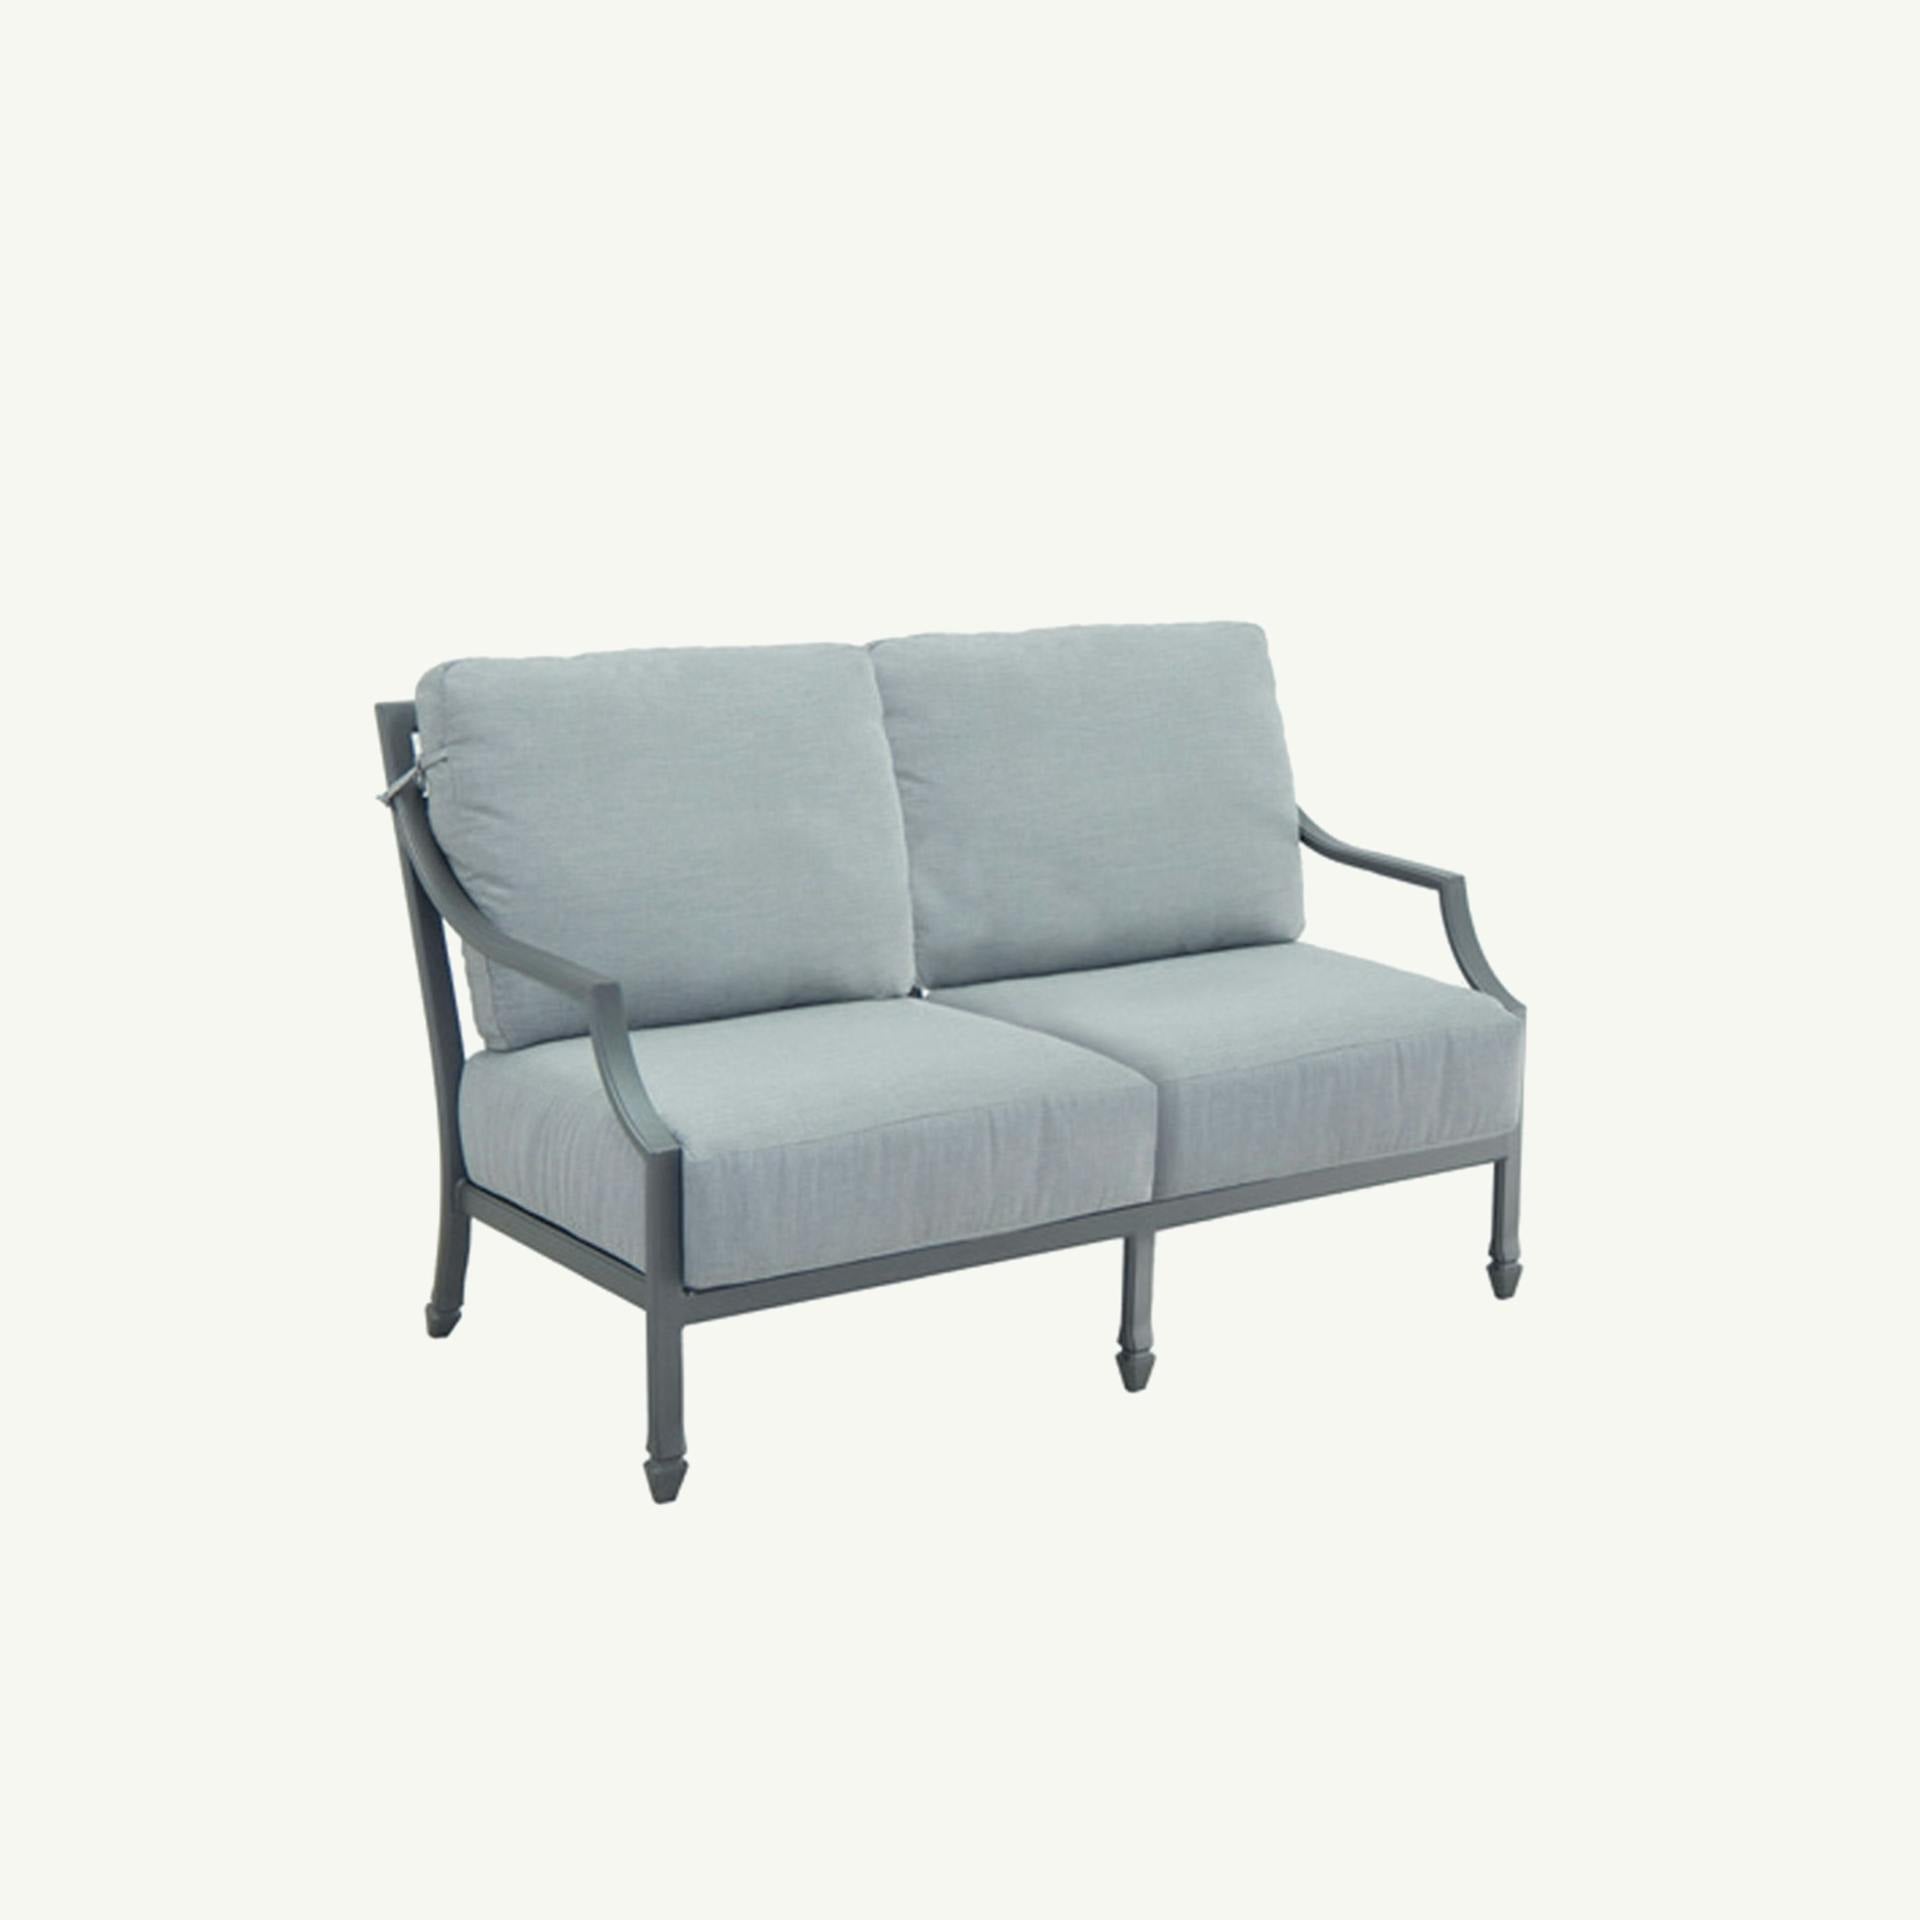 Lancaster Deep Seating Set By Castelle